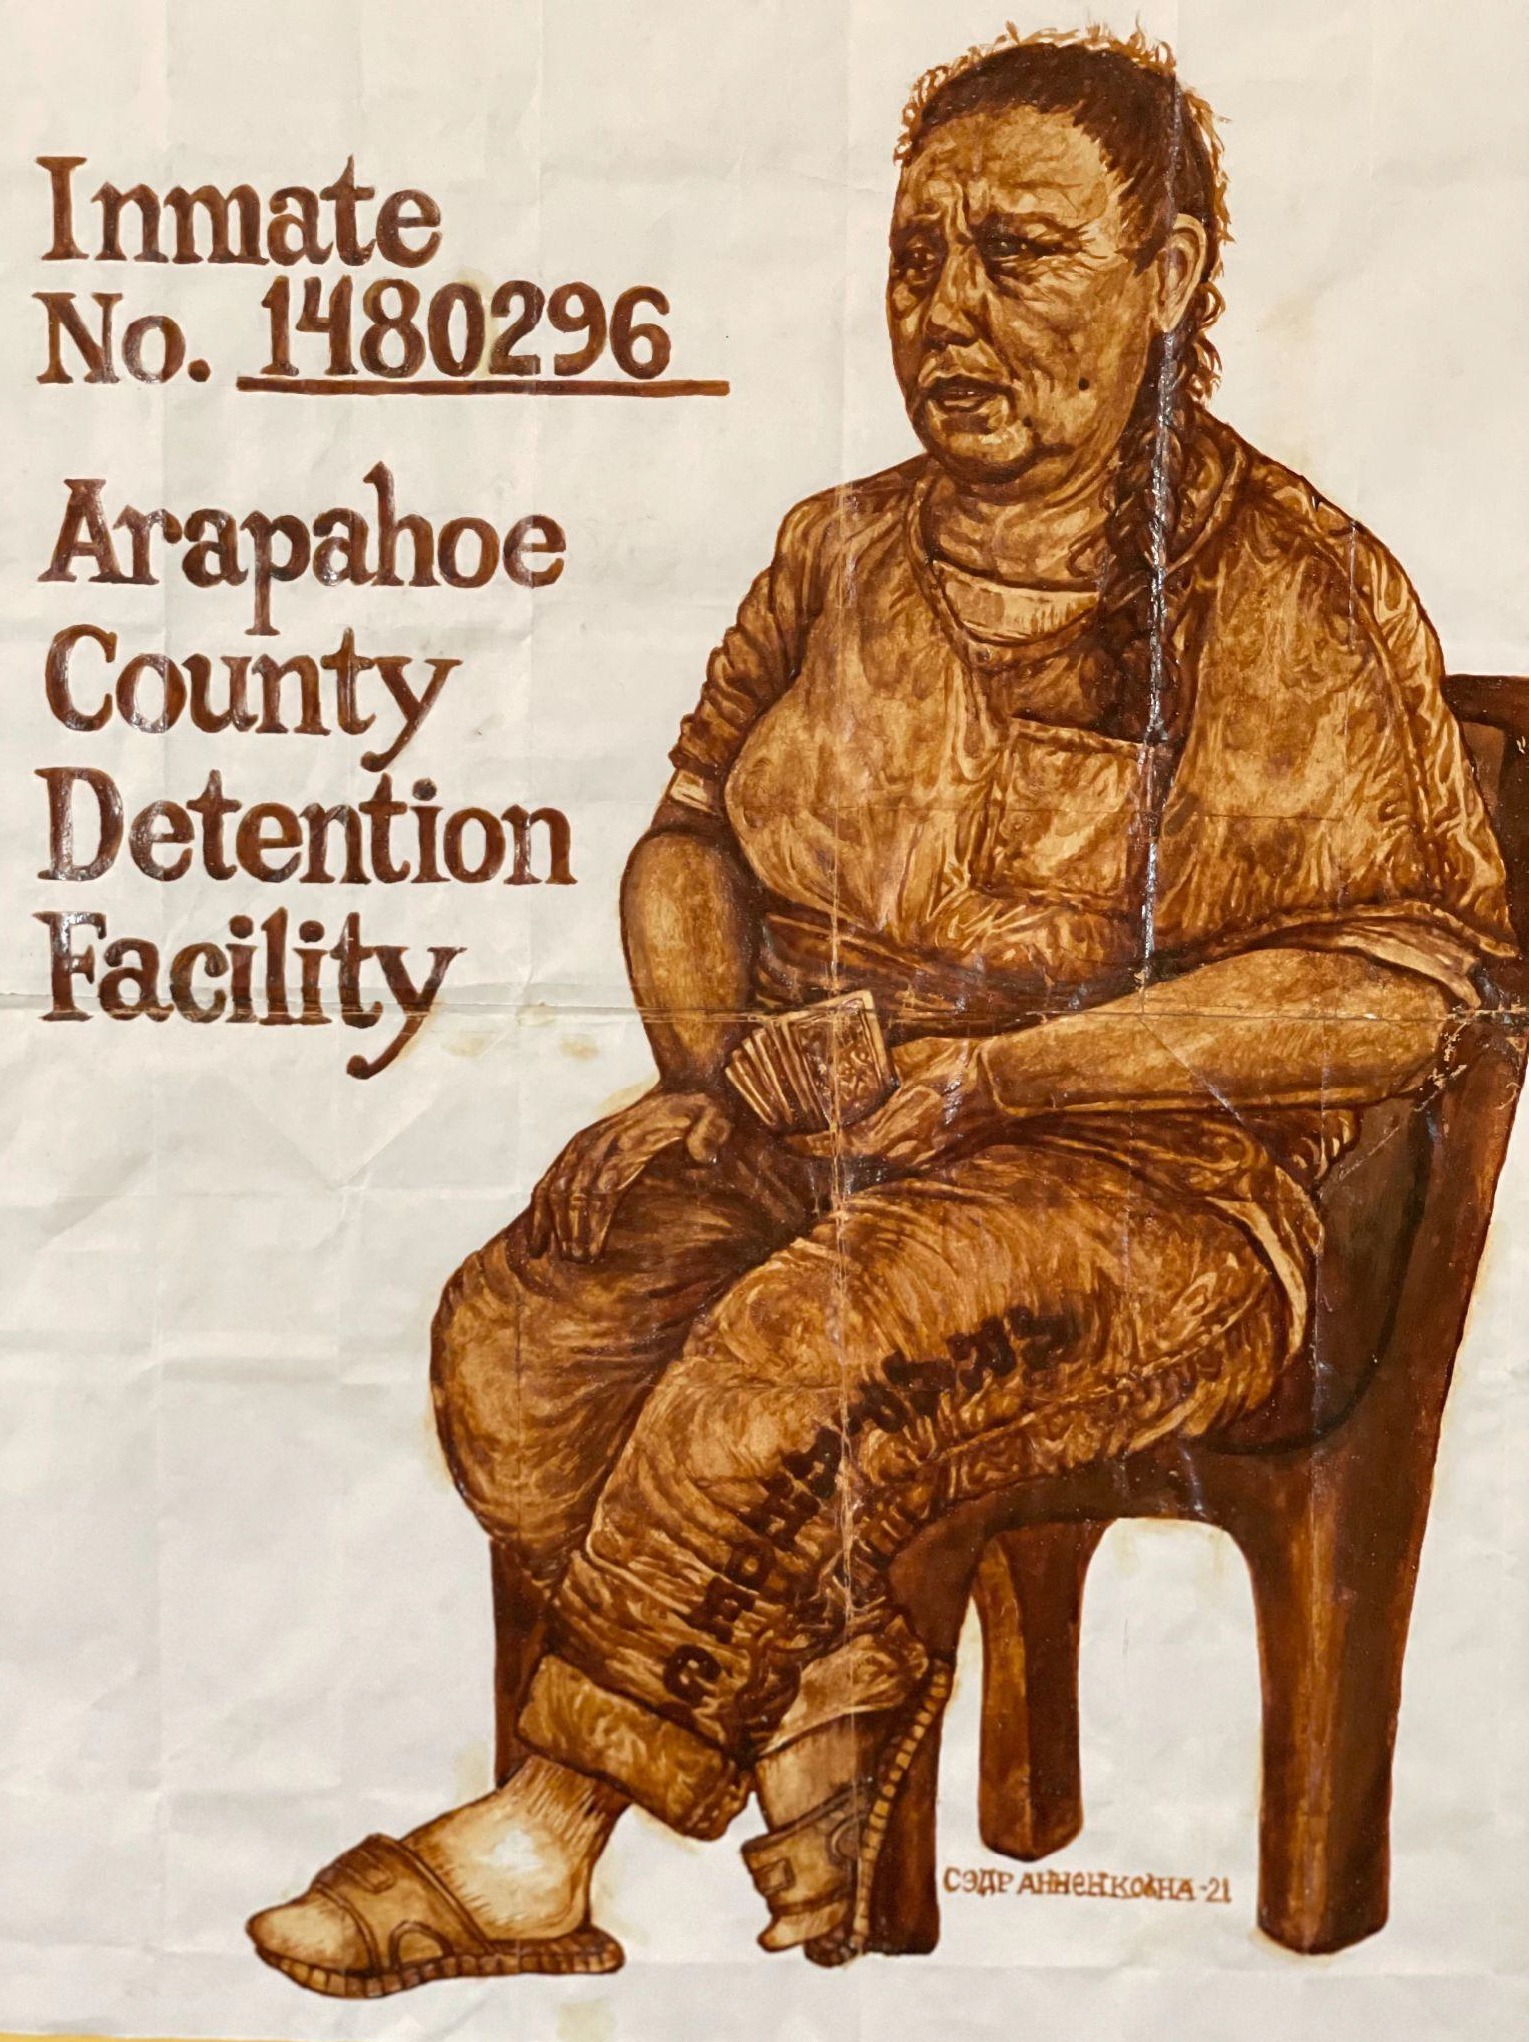 Portrait of a woman sitting in a chair holding money in her hand. She sits besides text that reads, "Inmate NO. 1480296 Arapohoe County Dentention Facilty"